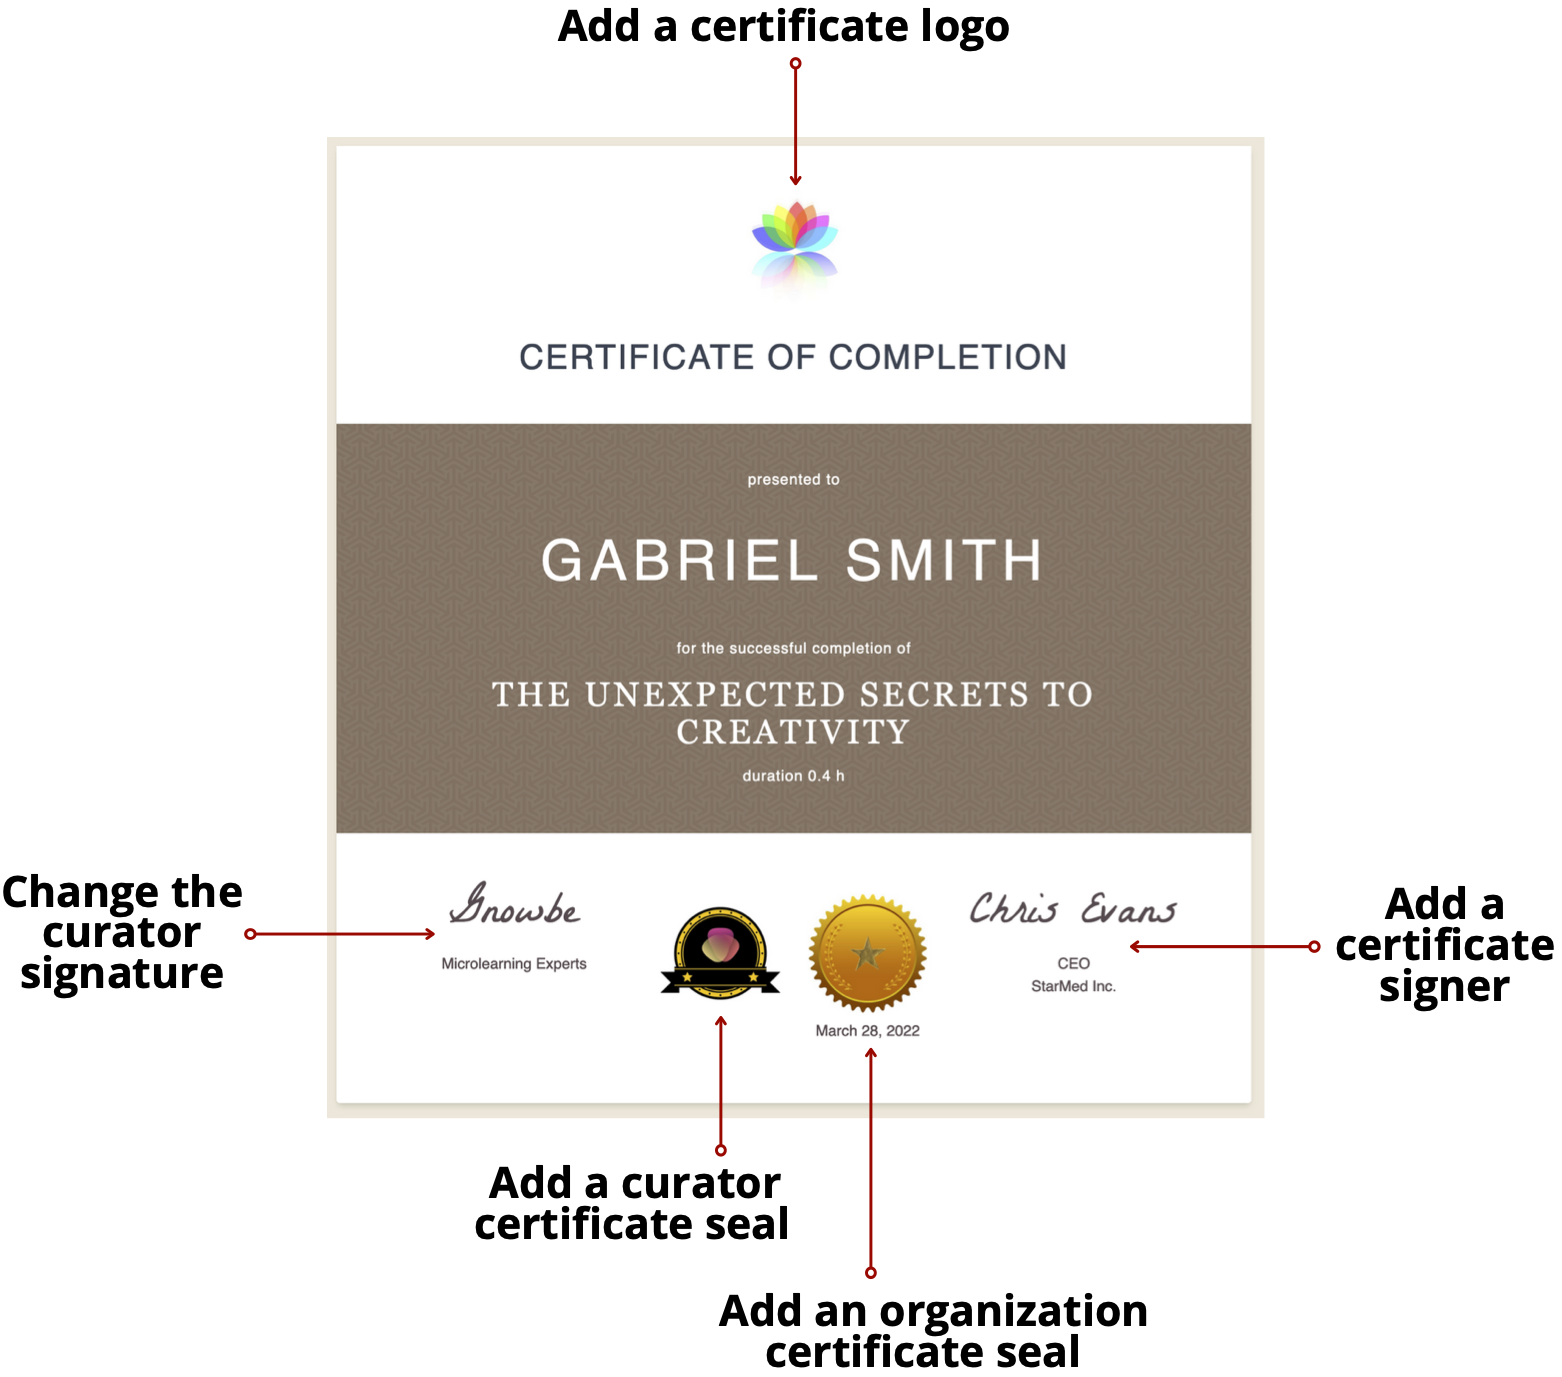 Adding_a_certificate_logo-2.png